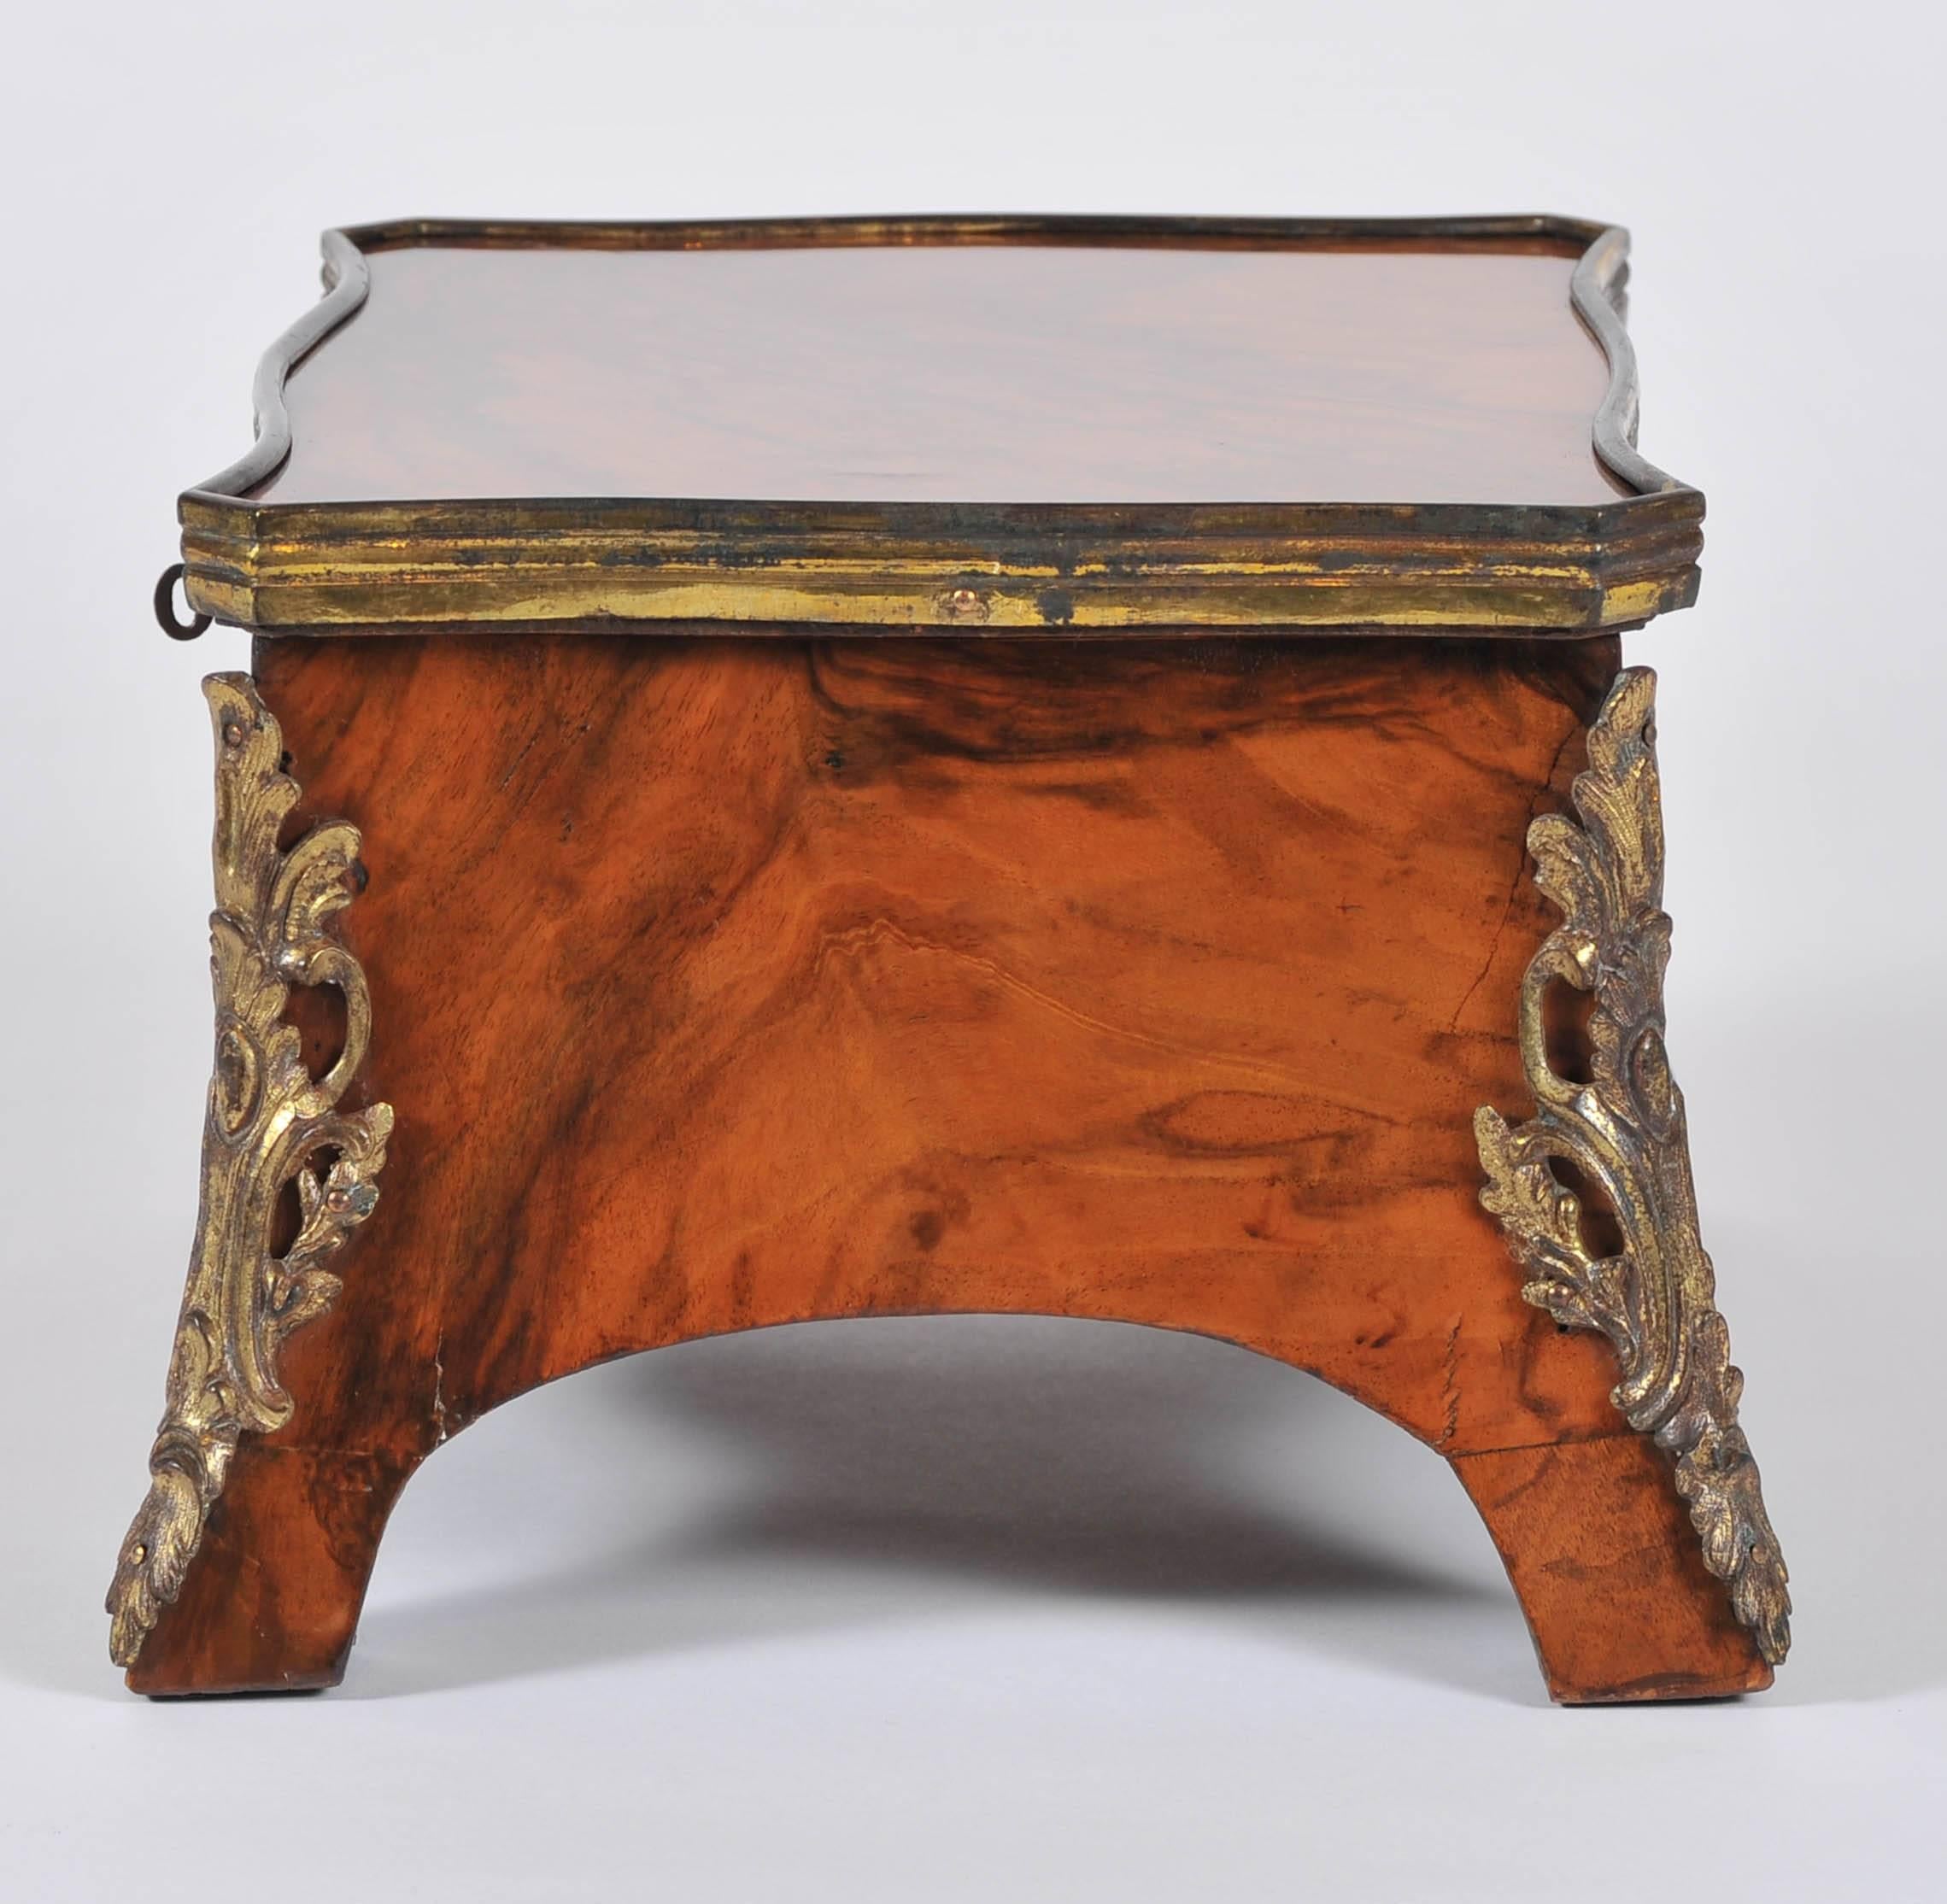 English Mid-19th Century Decorative Box, Walnut and Ormolu Mounted, Grand Tour Style For Sale